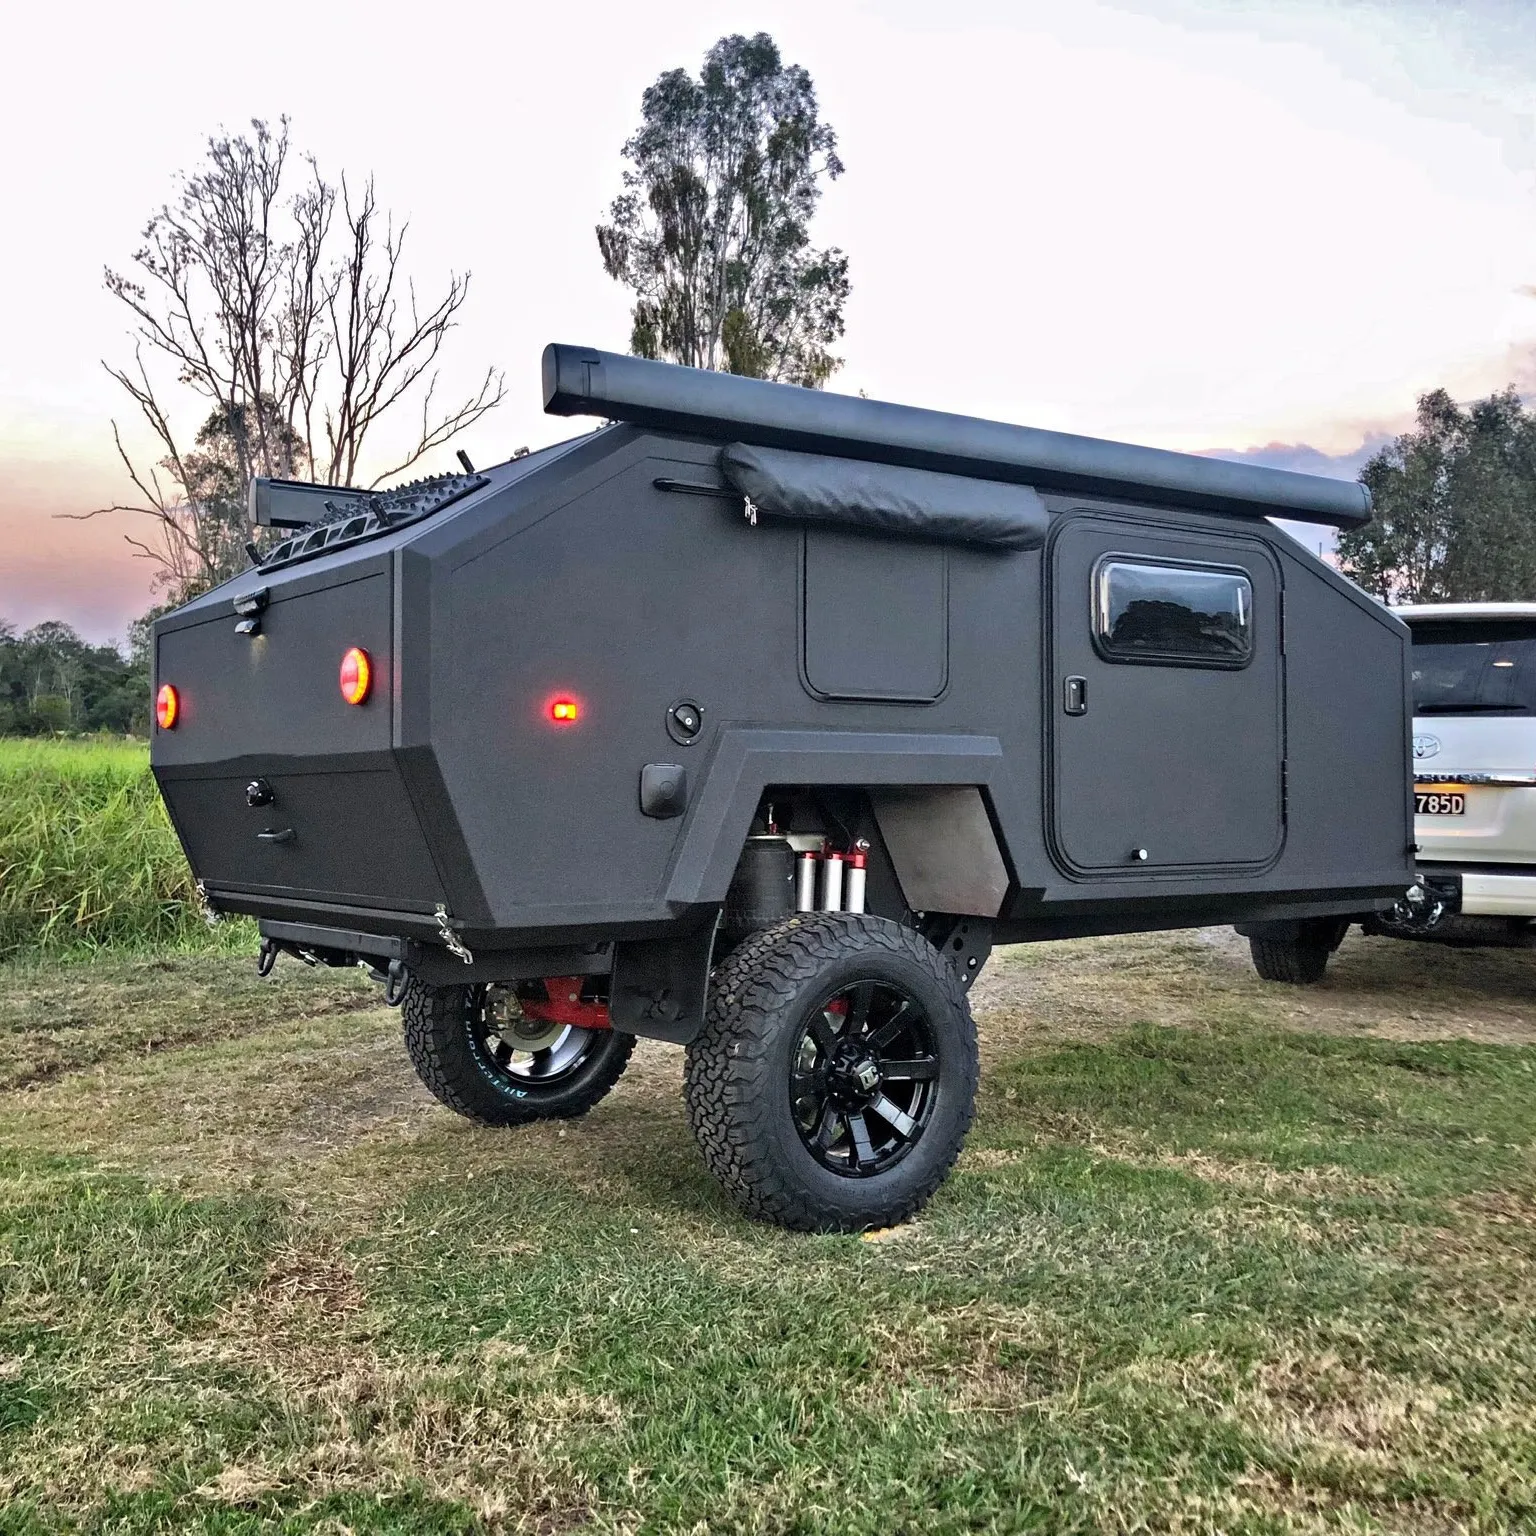 Ecocamper Small Pop Up Mini Teardrop Camping Trailer Offroad With Rooftop Tent and Kitchen for Sale